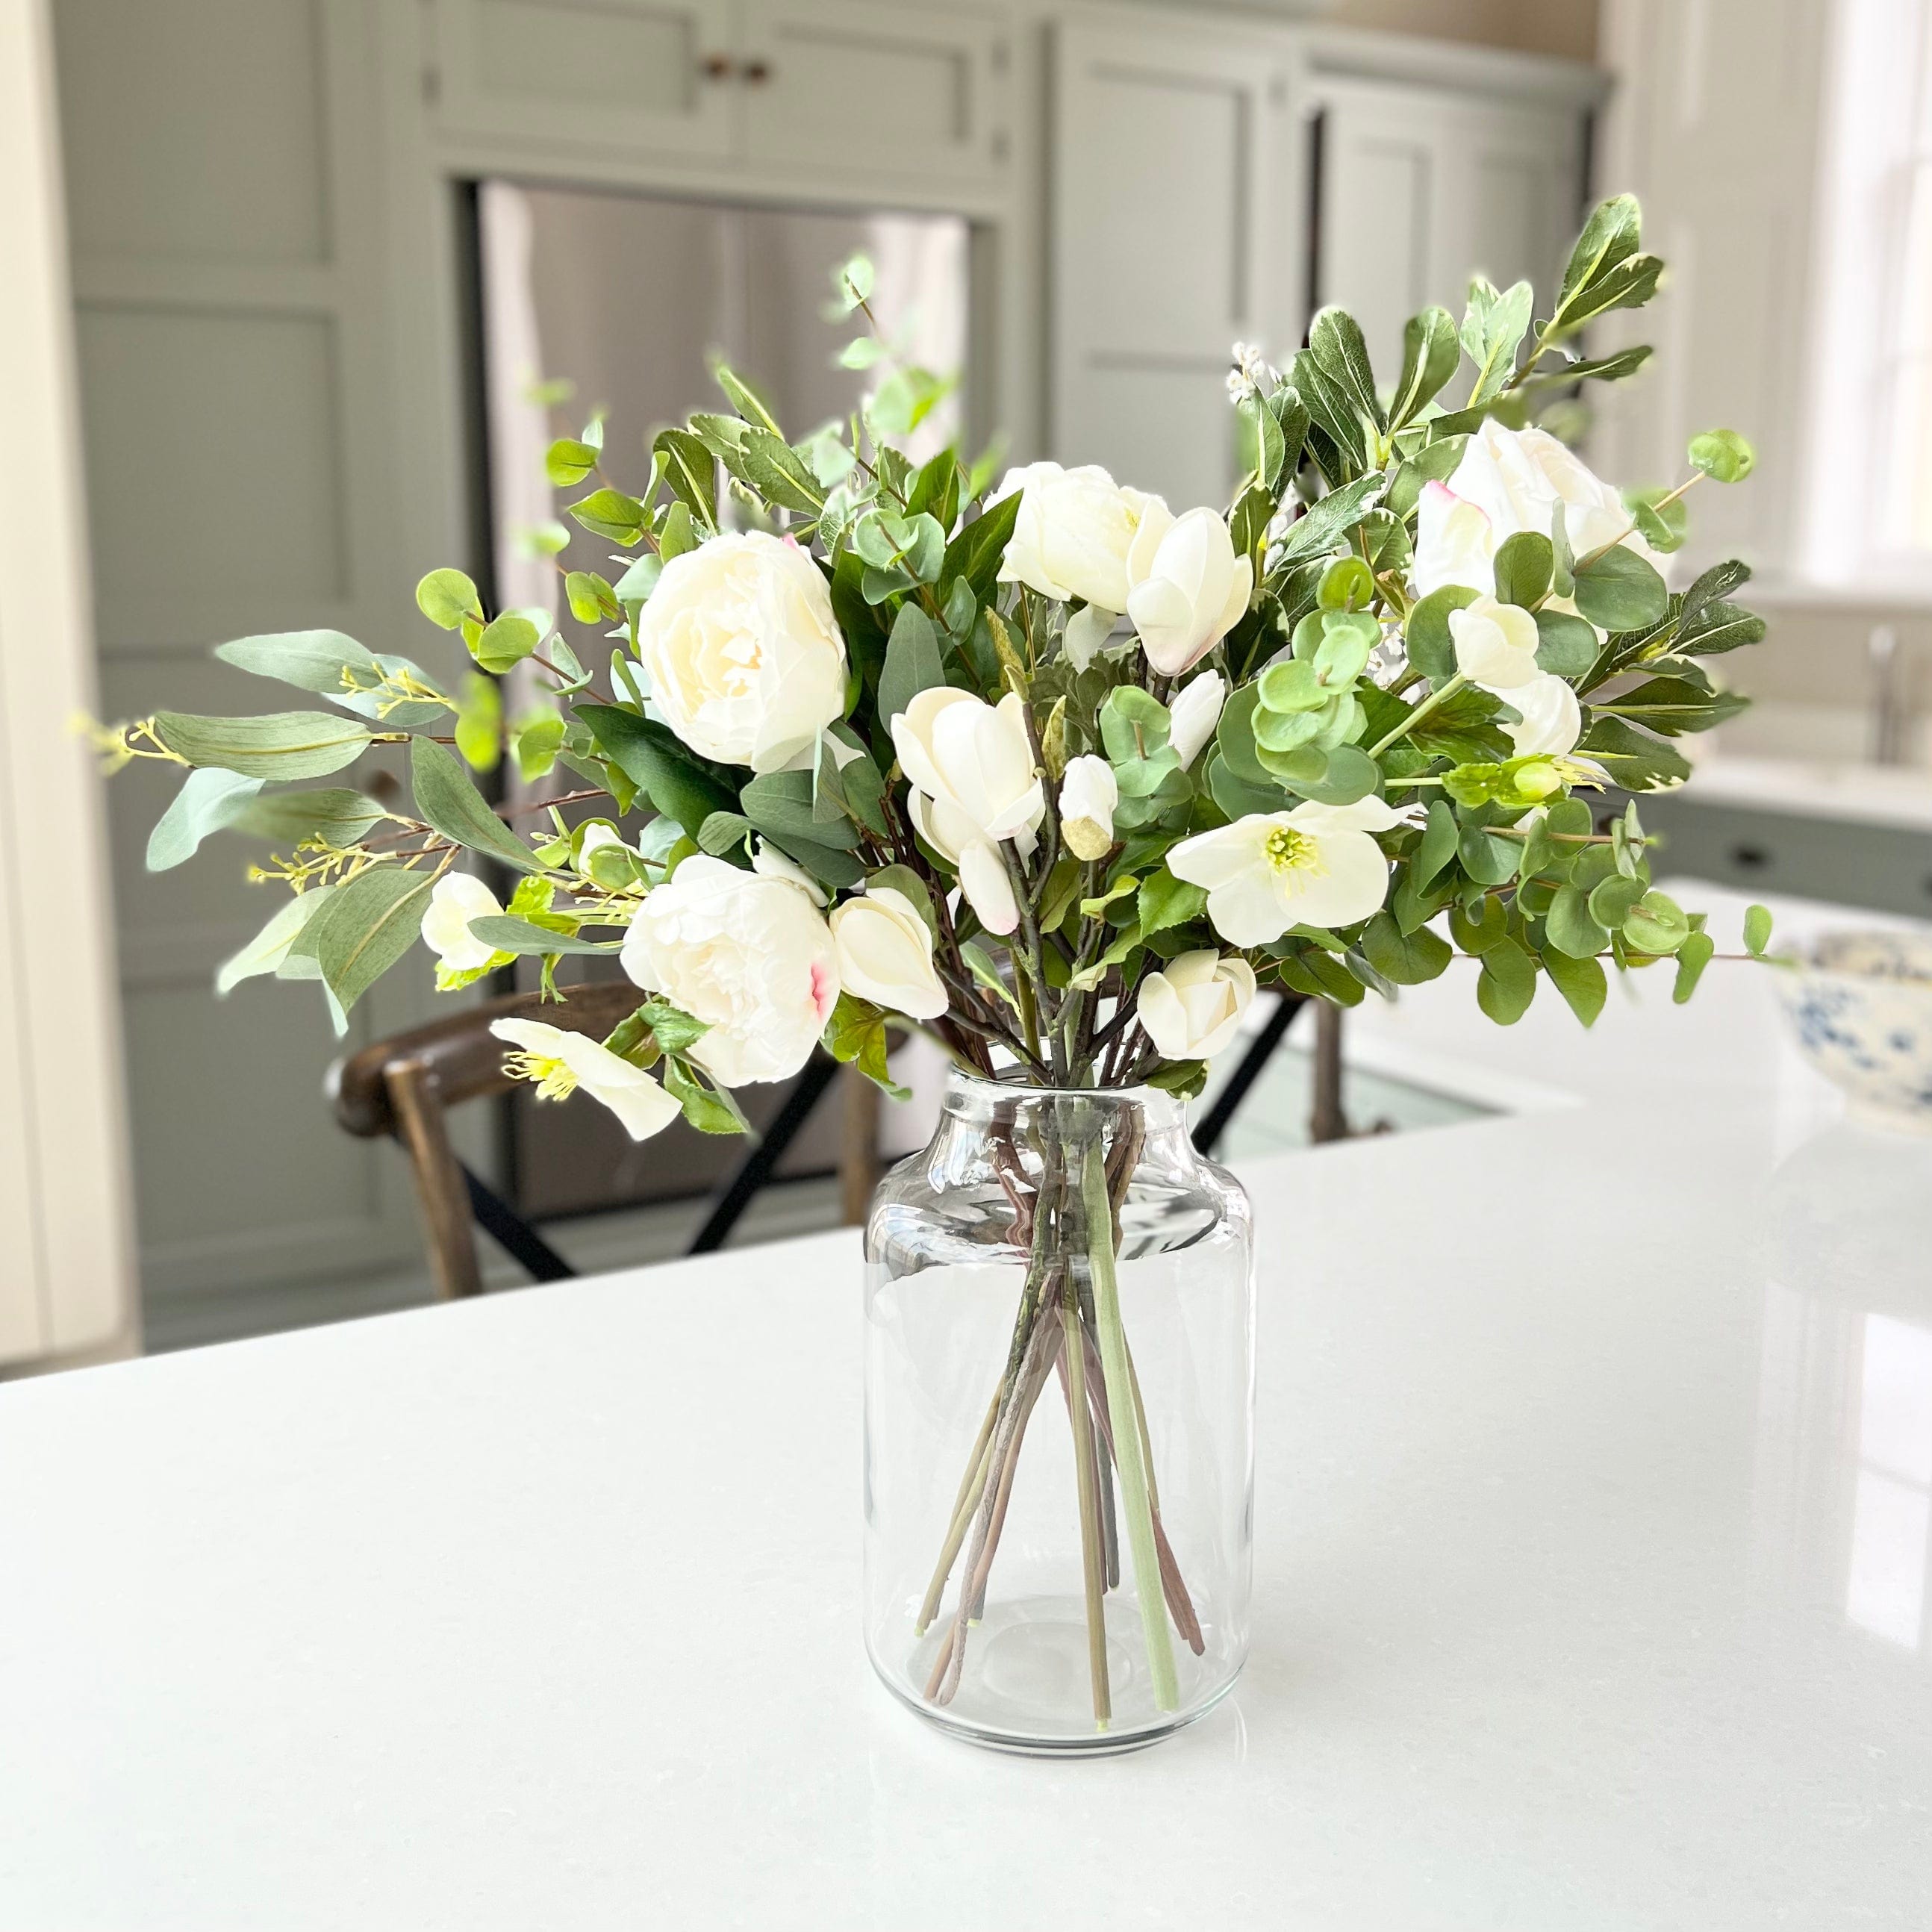 Foliage and White Flowers Arrangement